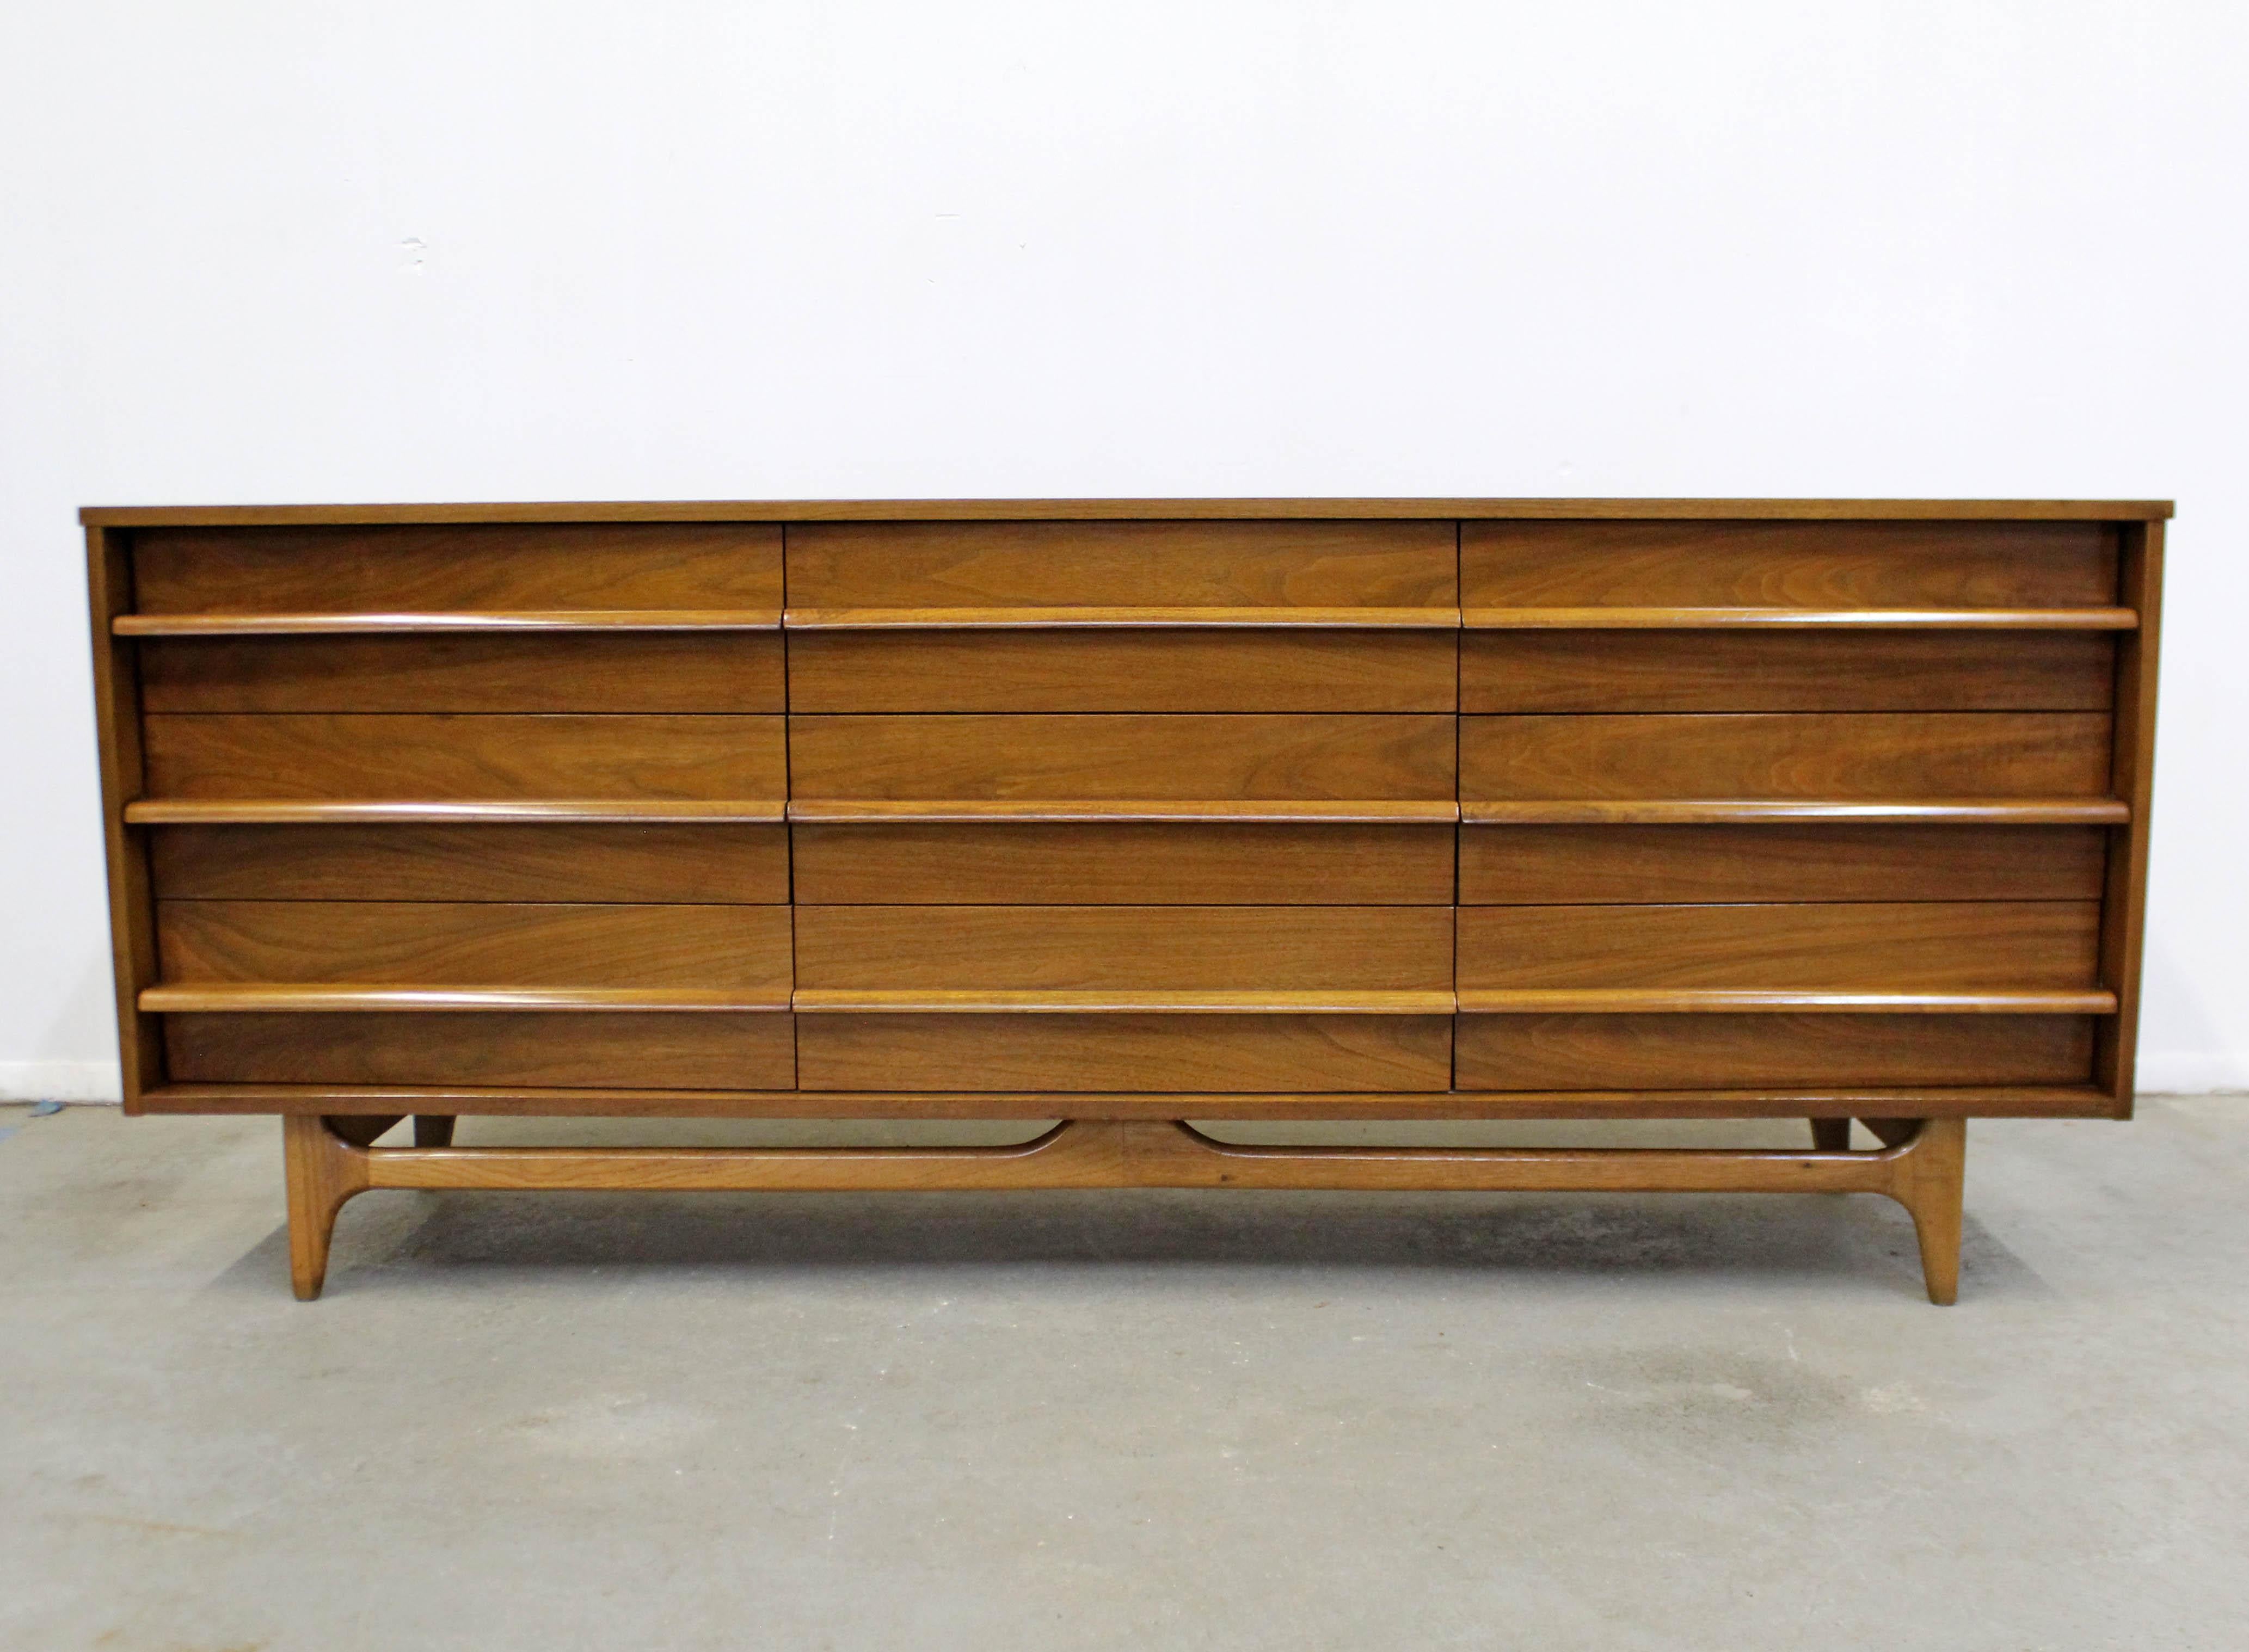 Offered is a vintage Mid-Century Modern concave front credenza with sculpted pulls made by Young Manufacturing. Features a concave front, nine dovetailed drawers, and sculpted pulls. It is in overall good vintage condition with slight surface